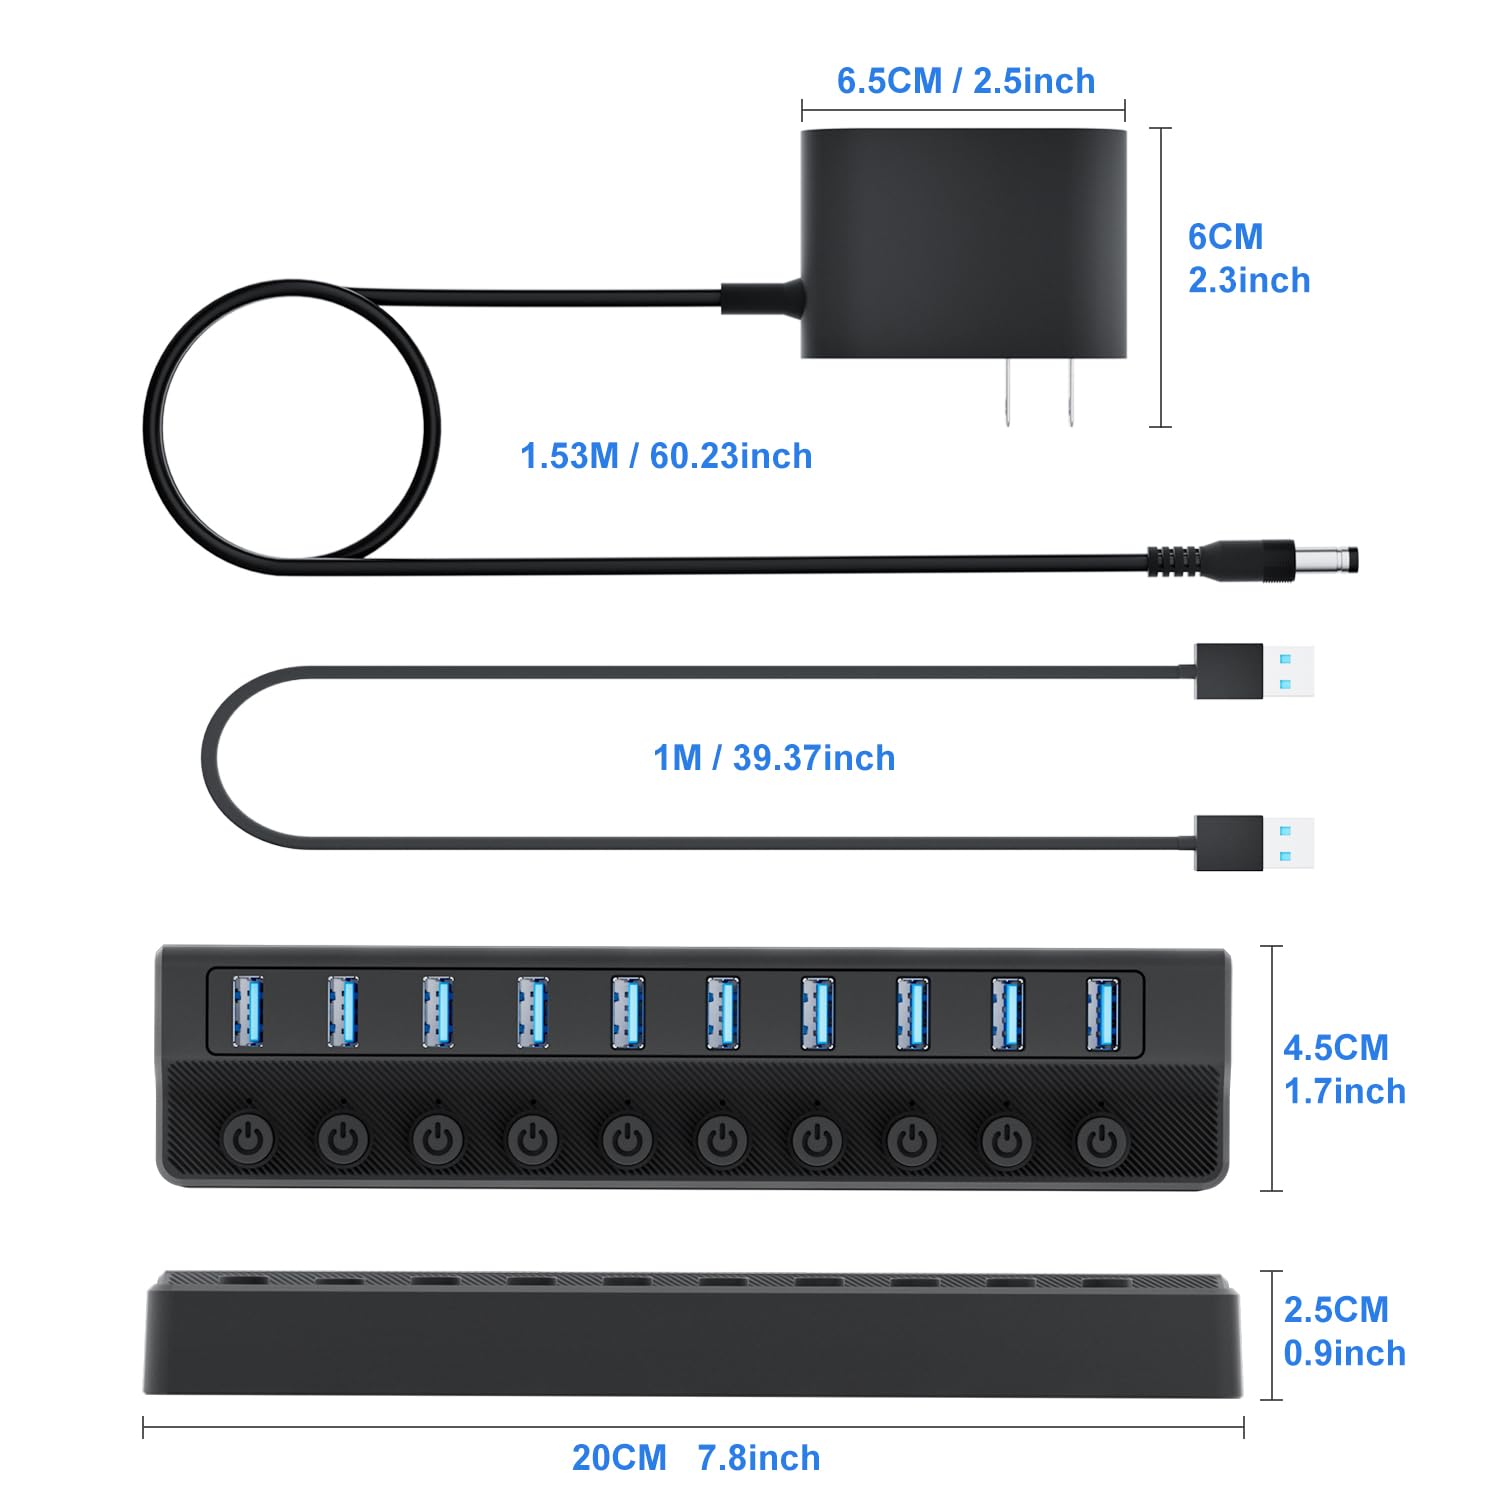 Onfinio Powered USB Hub 3.0, 10-Port USB Splitter Hub with Individual On/Off Switches and 12V/2A Power Adapter USB Extension for MacBook, Mac Pro/Mini and More